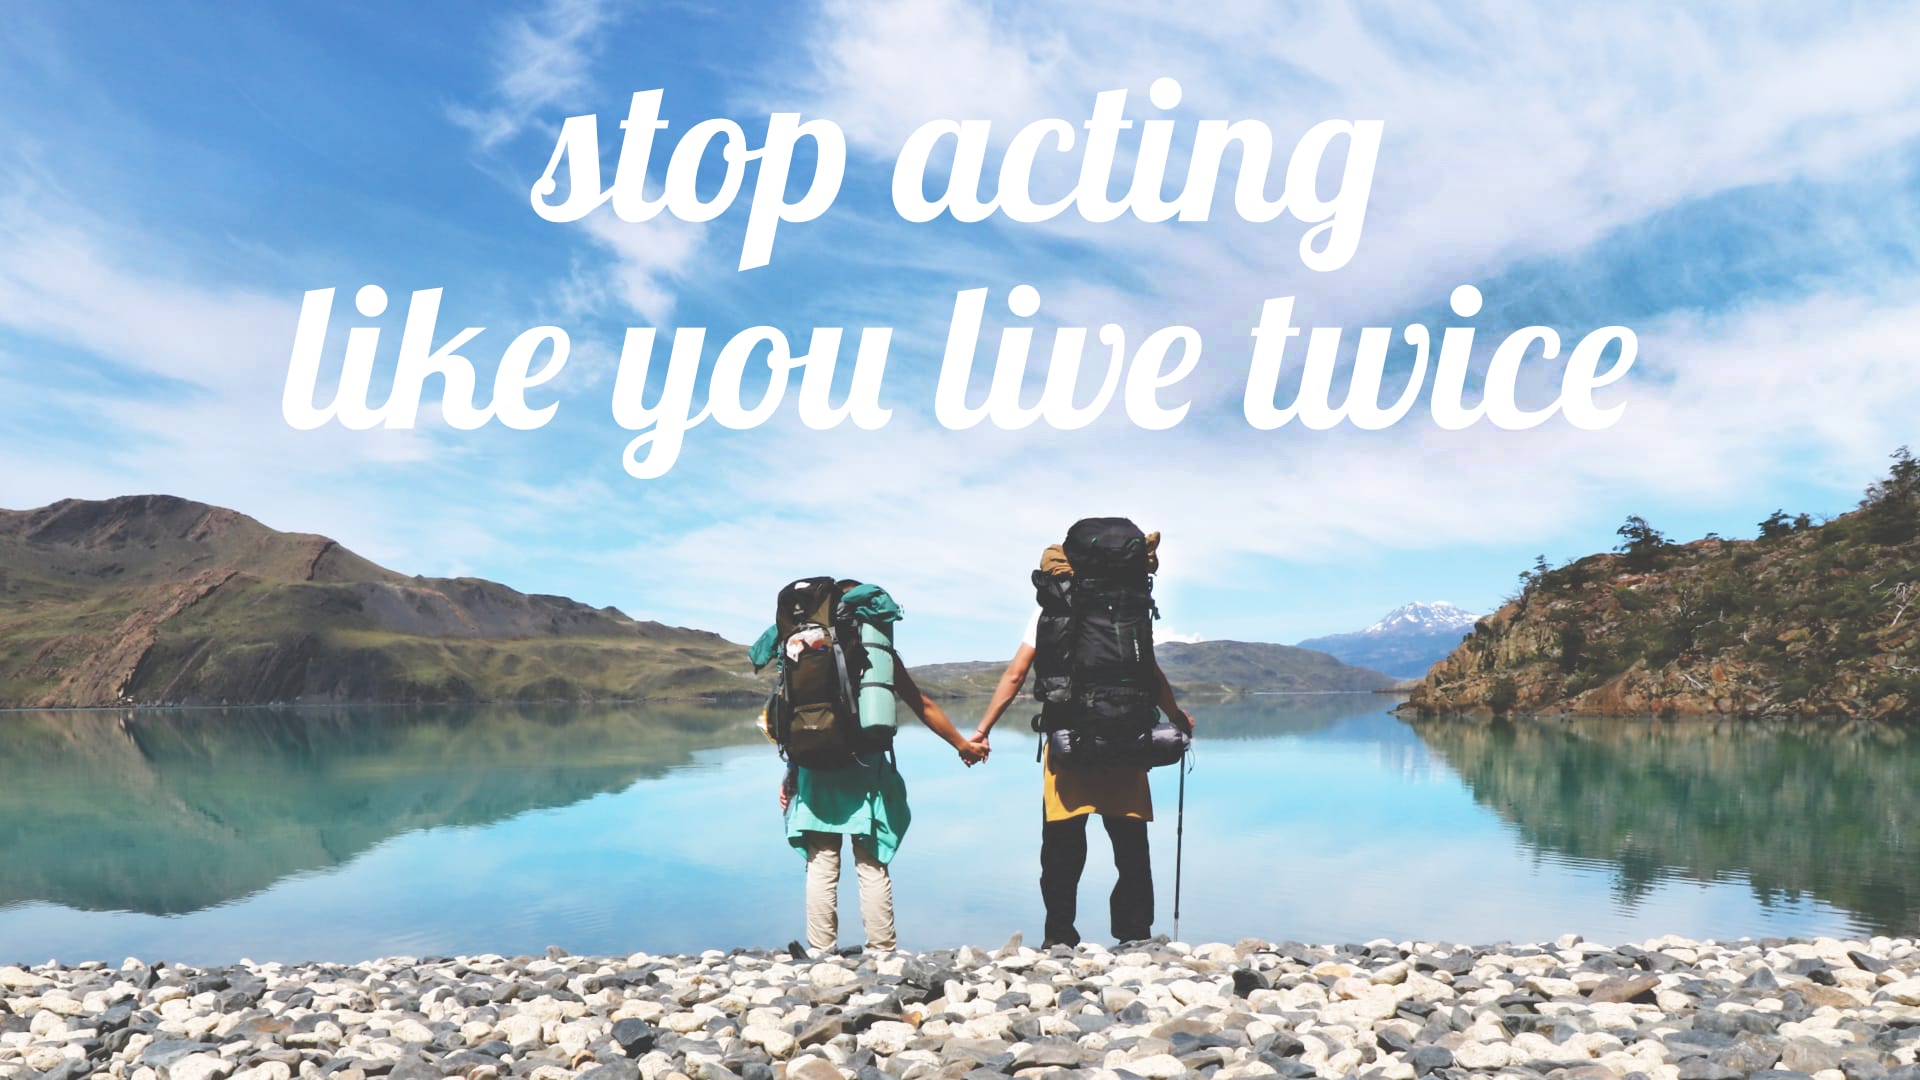 Stop acting like you live twice